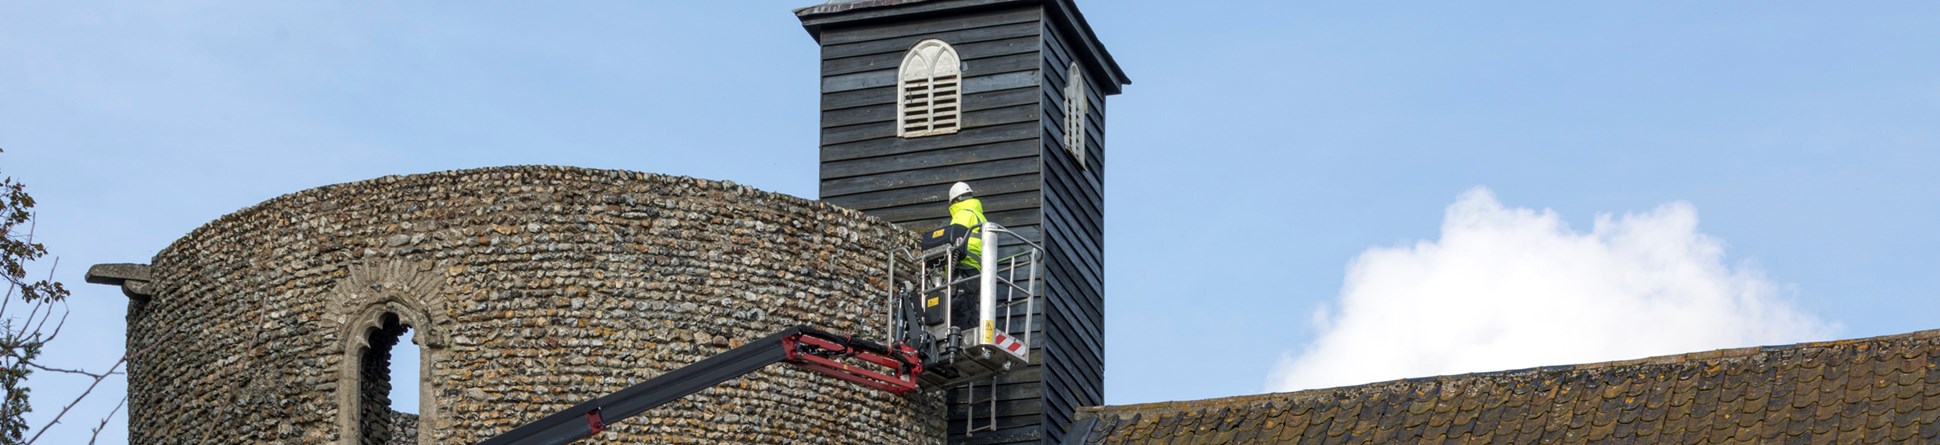 A man in high-vis jacket and hard hat works on the tower wall from a cherry picker.